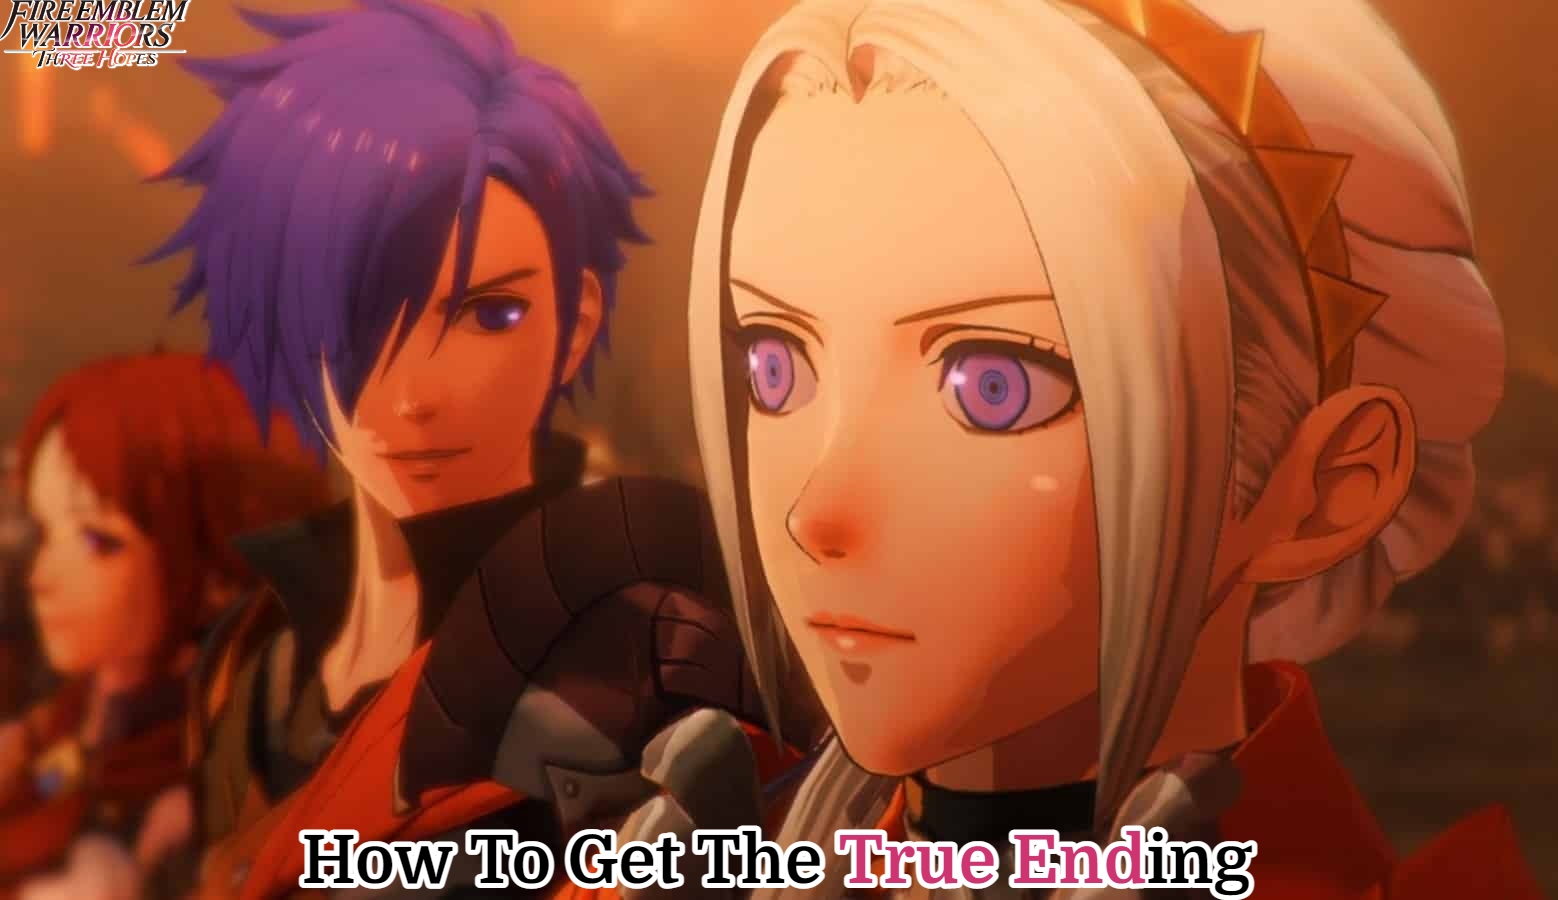 You are currently viewing How To Get The True Ending In Fire Emblem Warriors: Three Hopes